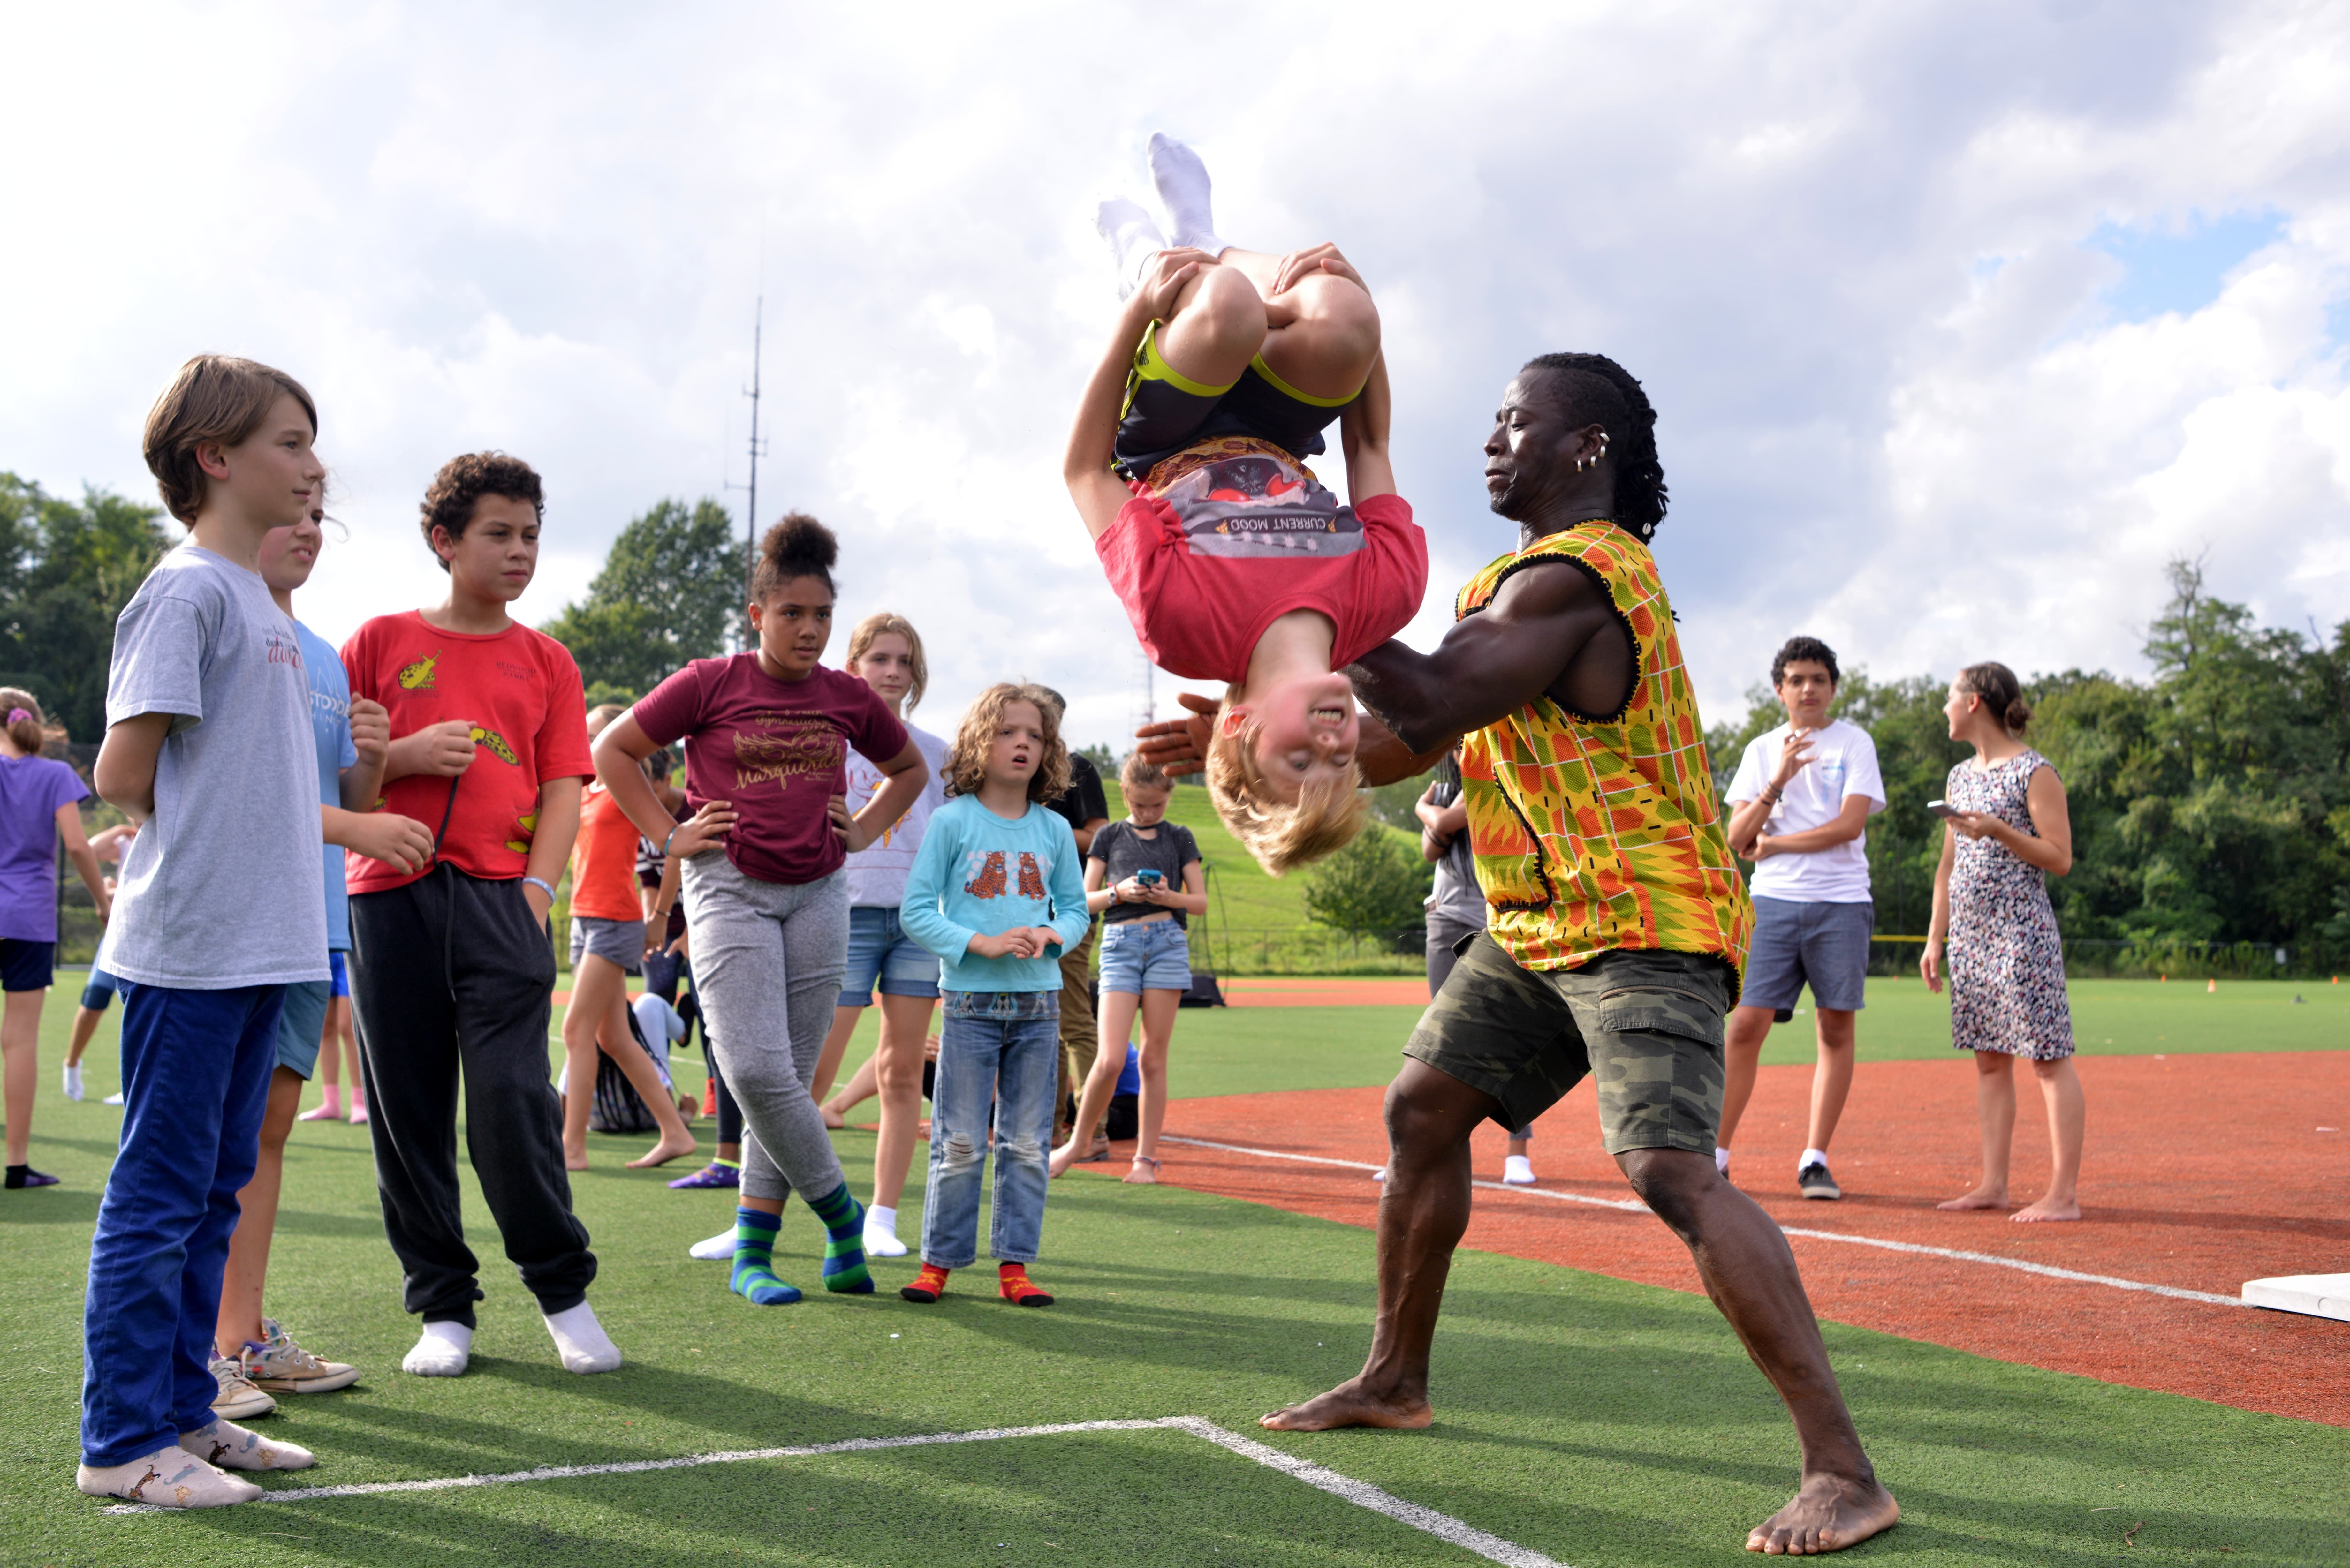 With help from Yamoussa, a Deal Middle School student completes a backflip. Image by Dermot Tatlow. United States, 2018. 